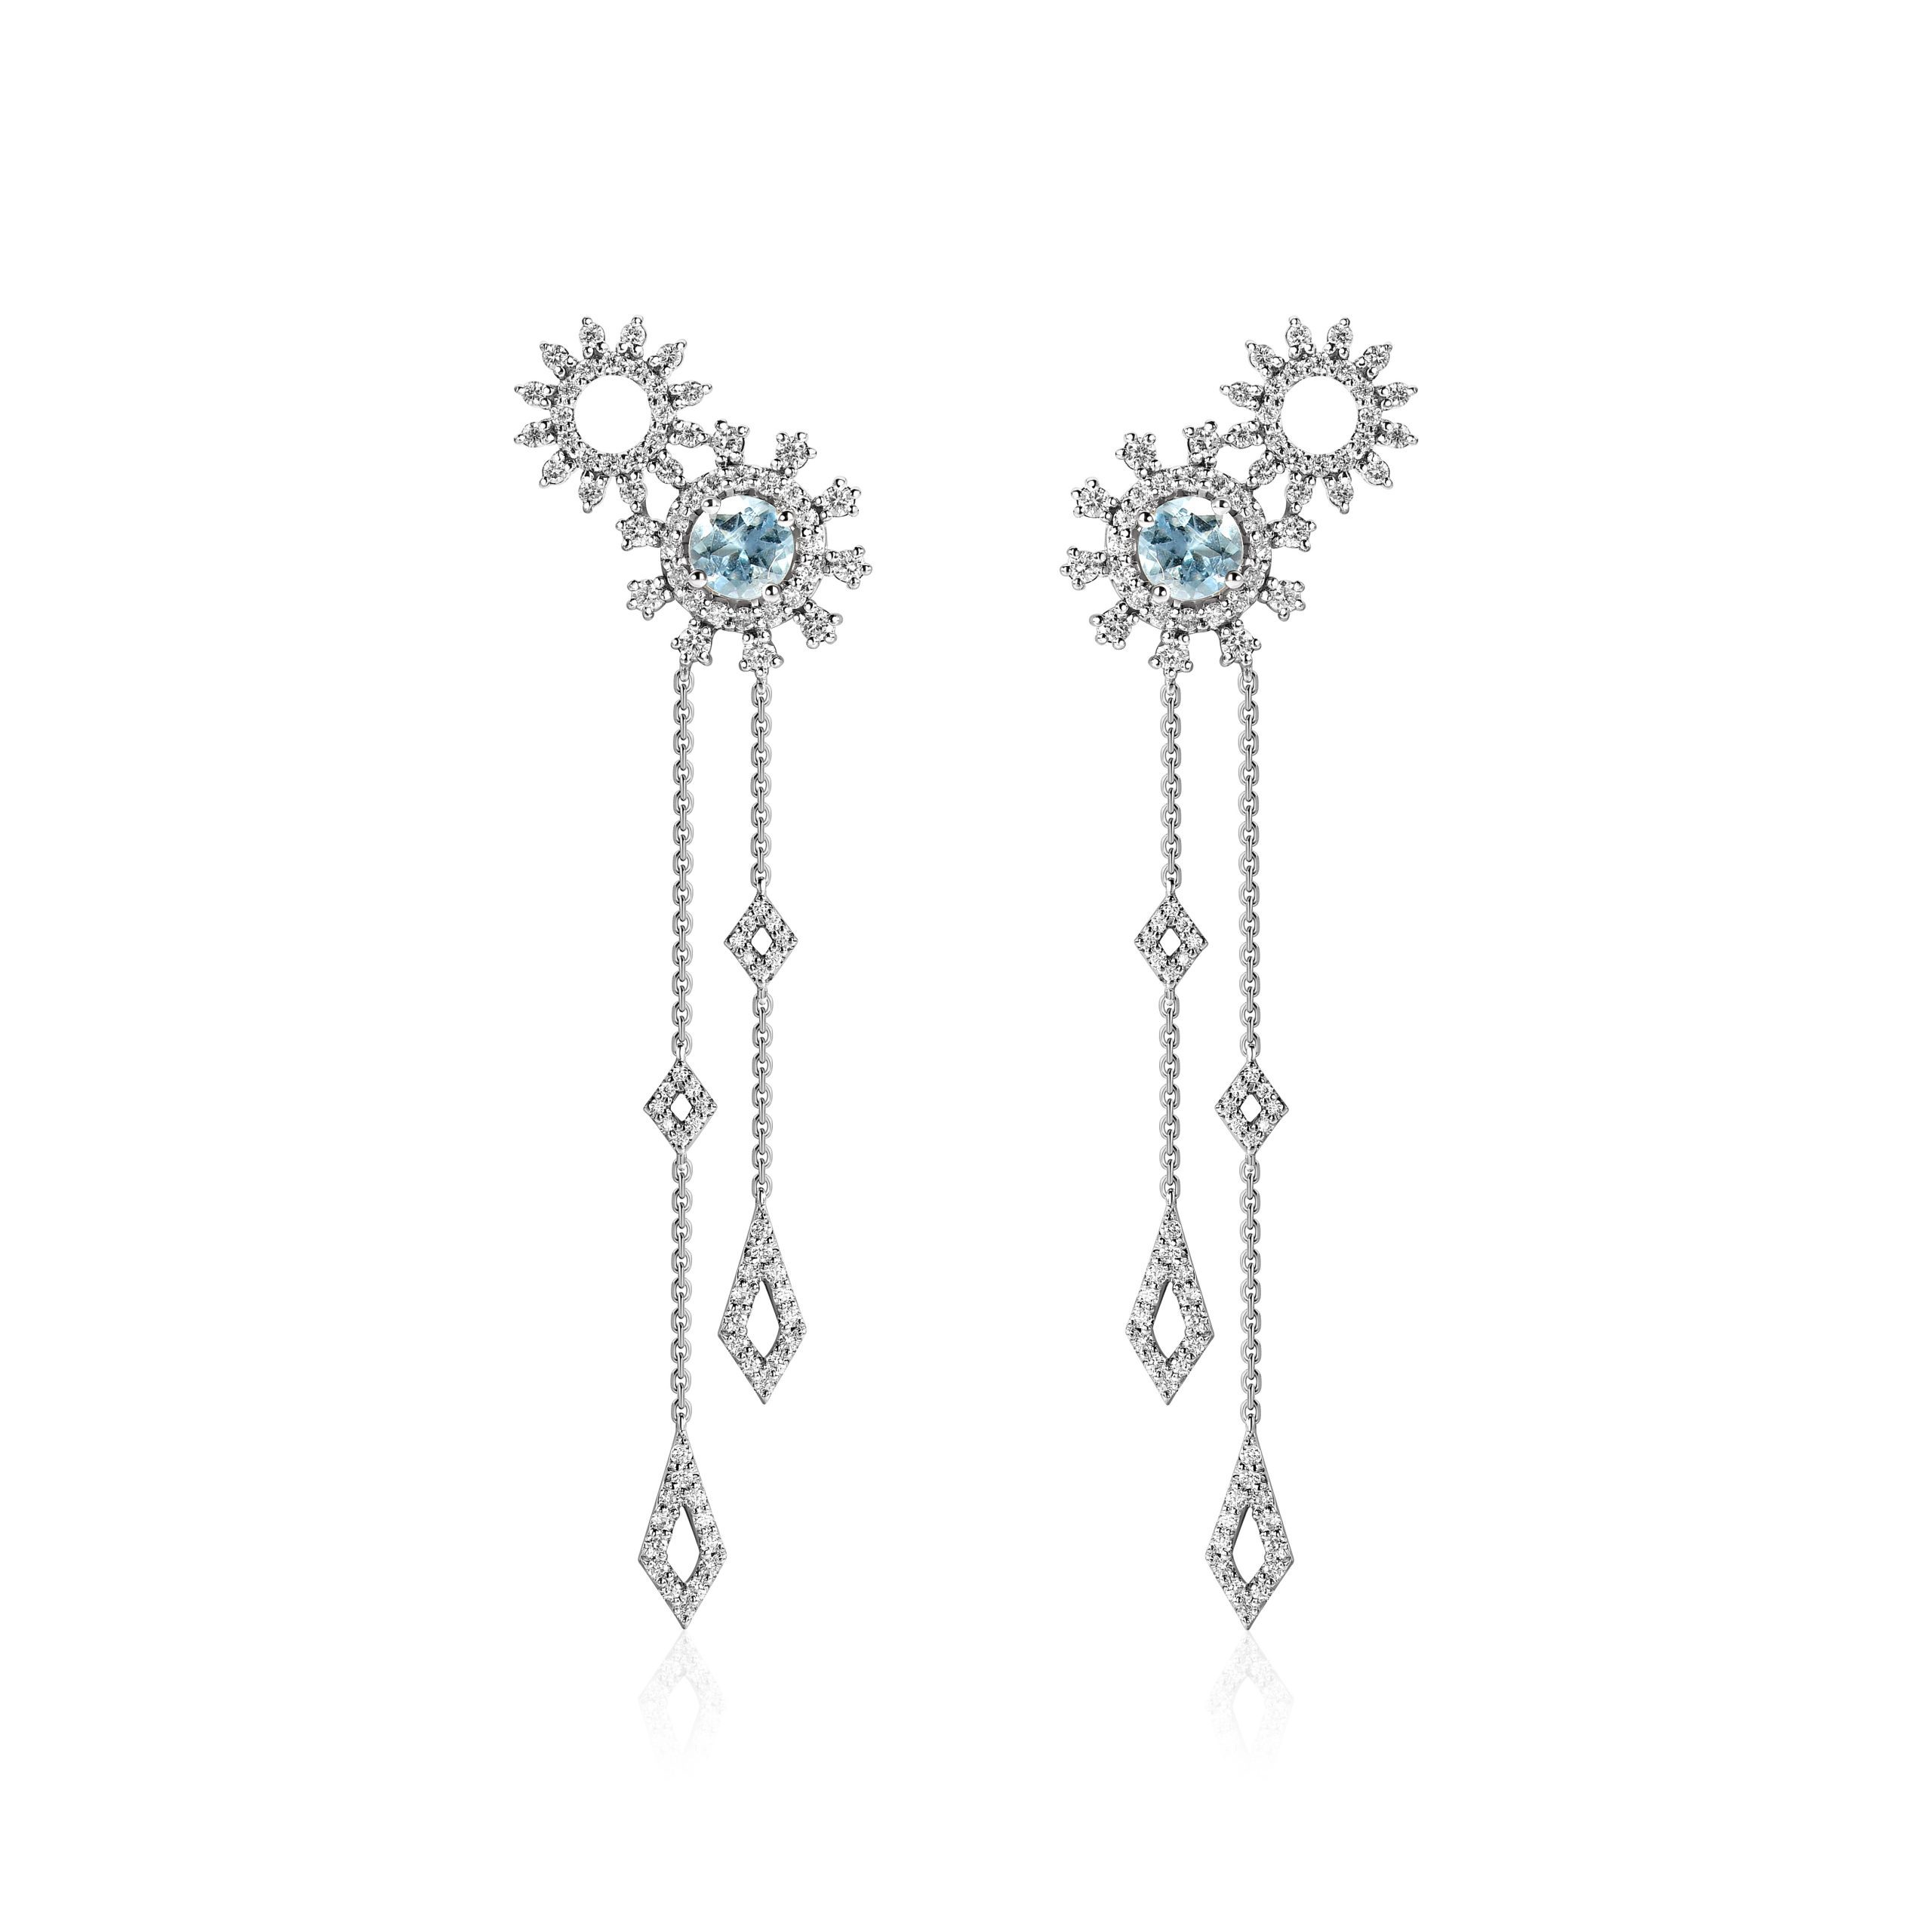 Earrings with aquamarines and diamonds #1